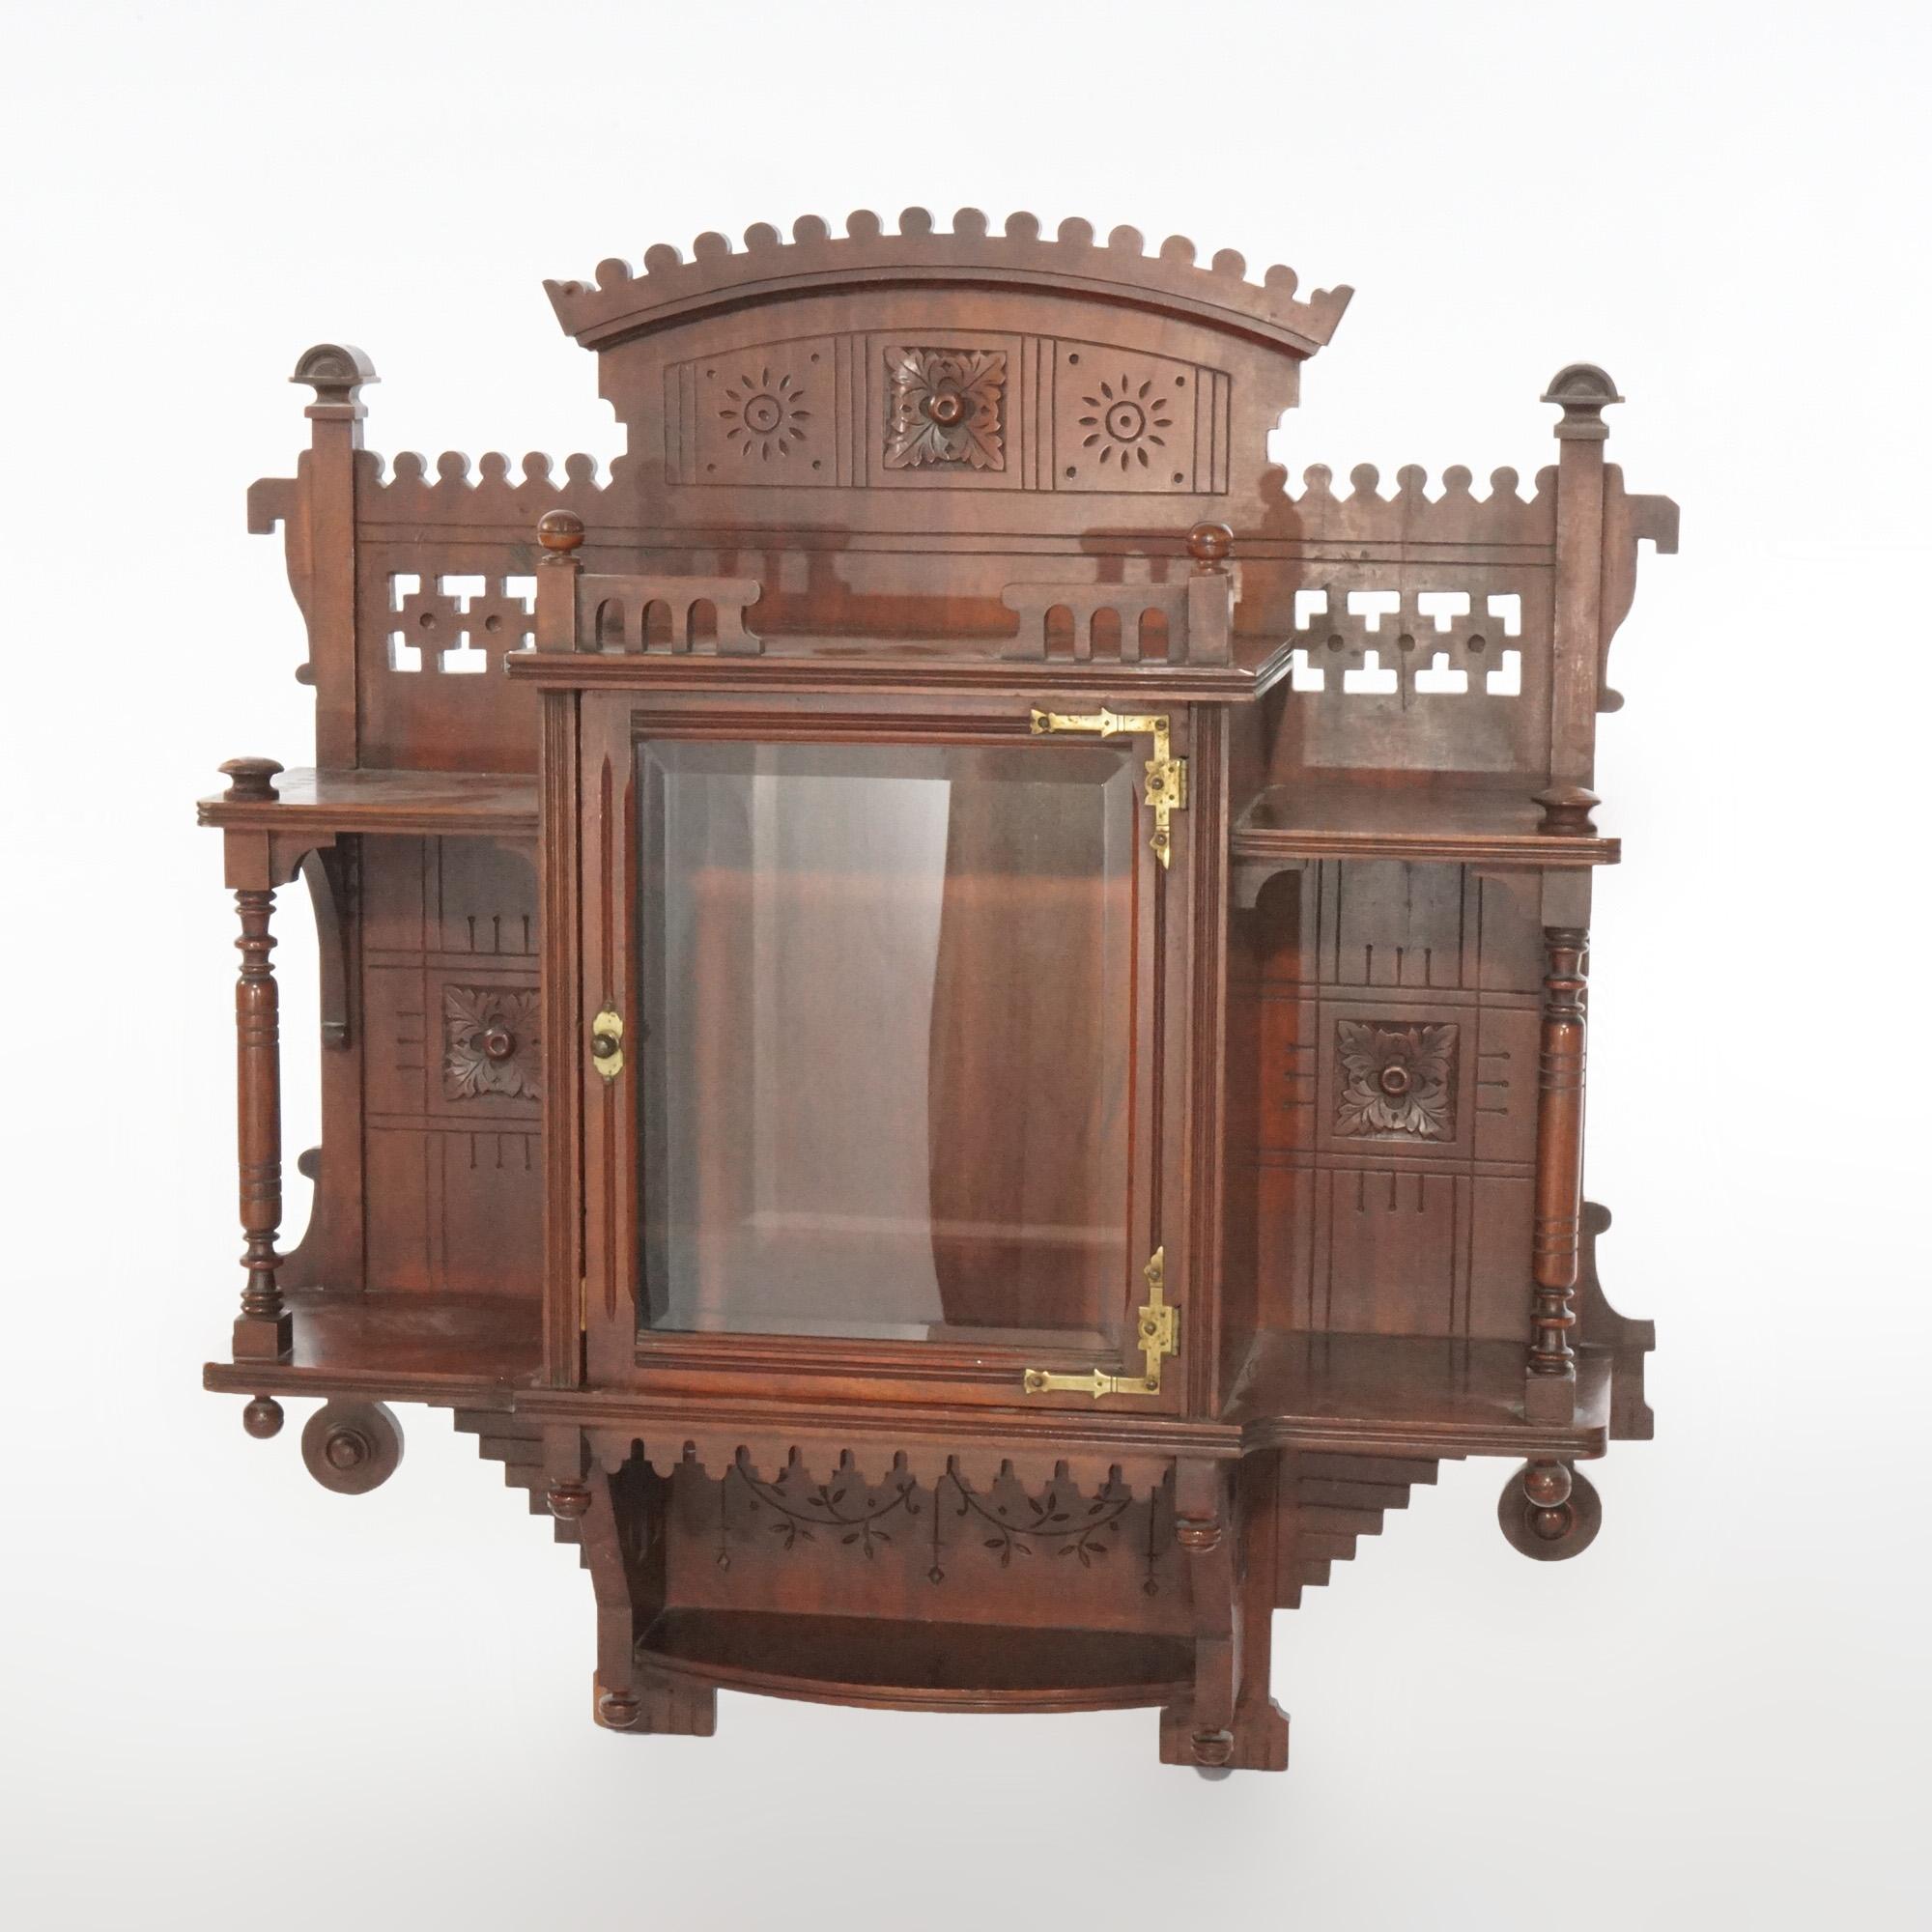 An antique Victorian Aesthetic mirrored wall cabinet offers mahogany construction with central compartment with glass door and having flanking display shelves, carved element throughout, circa 1890

Measures- 32'' H x 29'' W x 8 1/2 D.